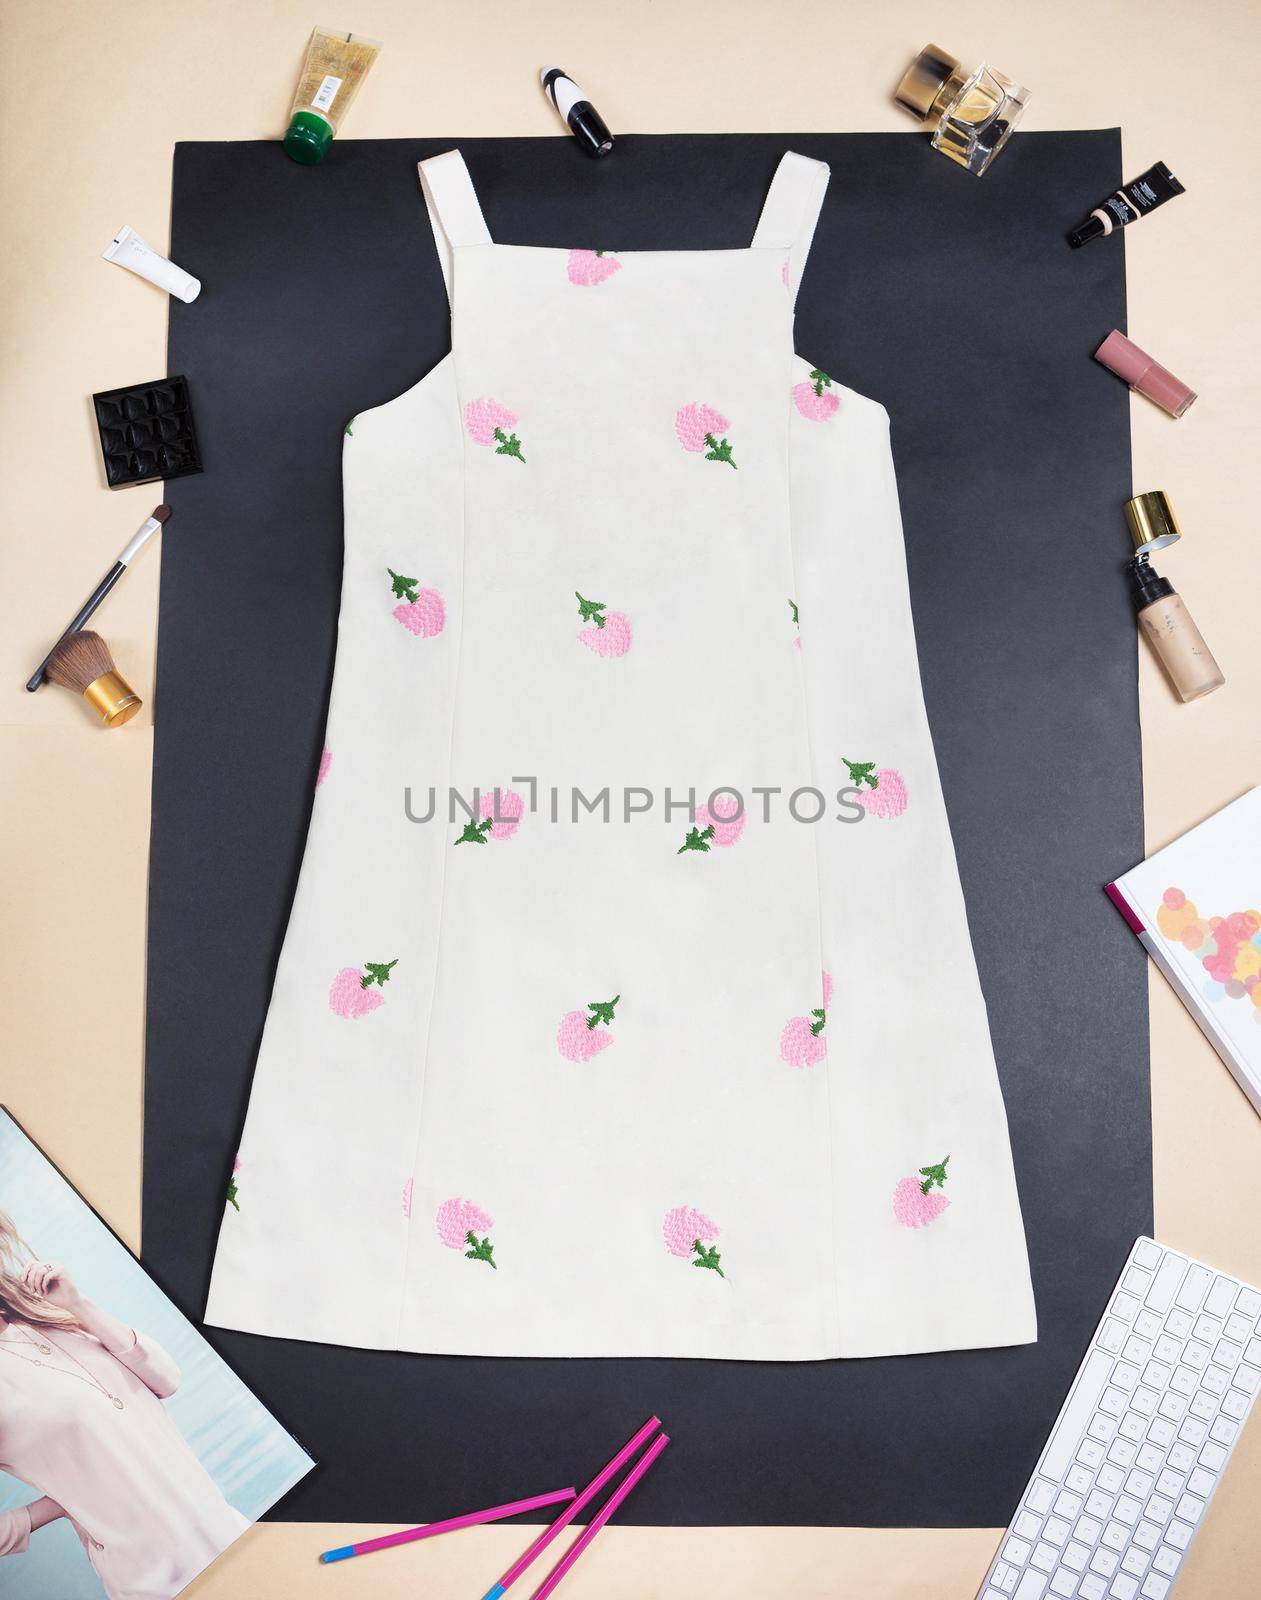 White flower woman outfit dress top view